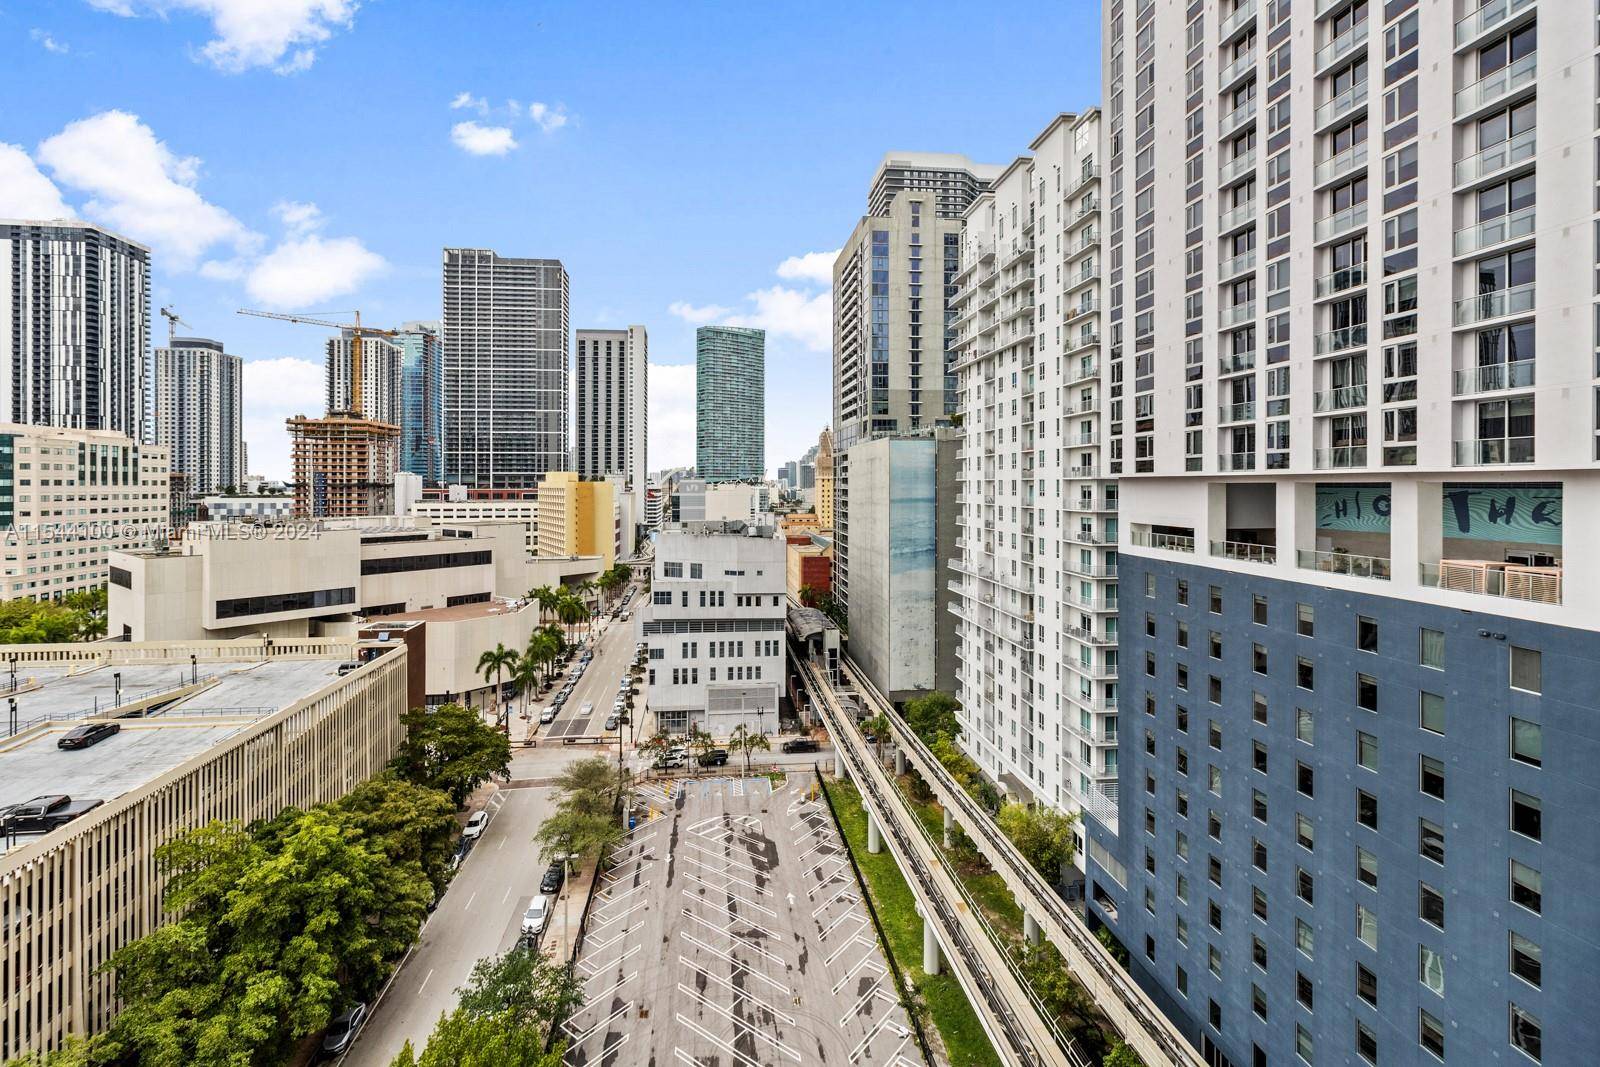 FANTASTIC VIEWS OF THE CITY FROM THIS 14TH FLOOR RESIDENCE IN THE HEART OF DOWNTOWN MIAMI !